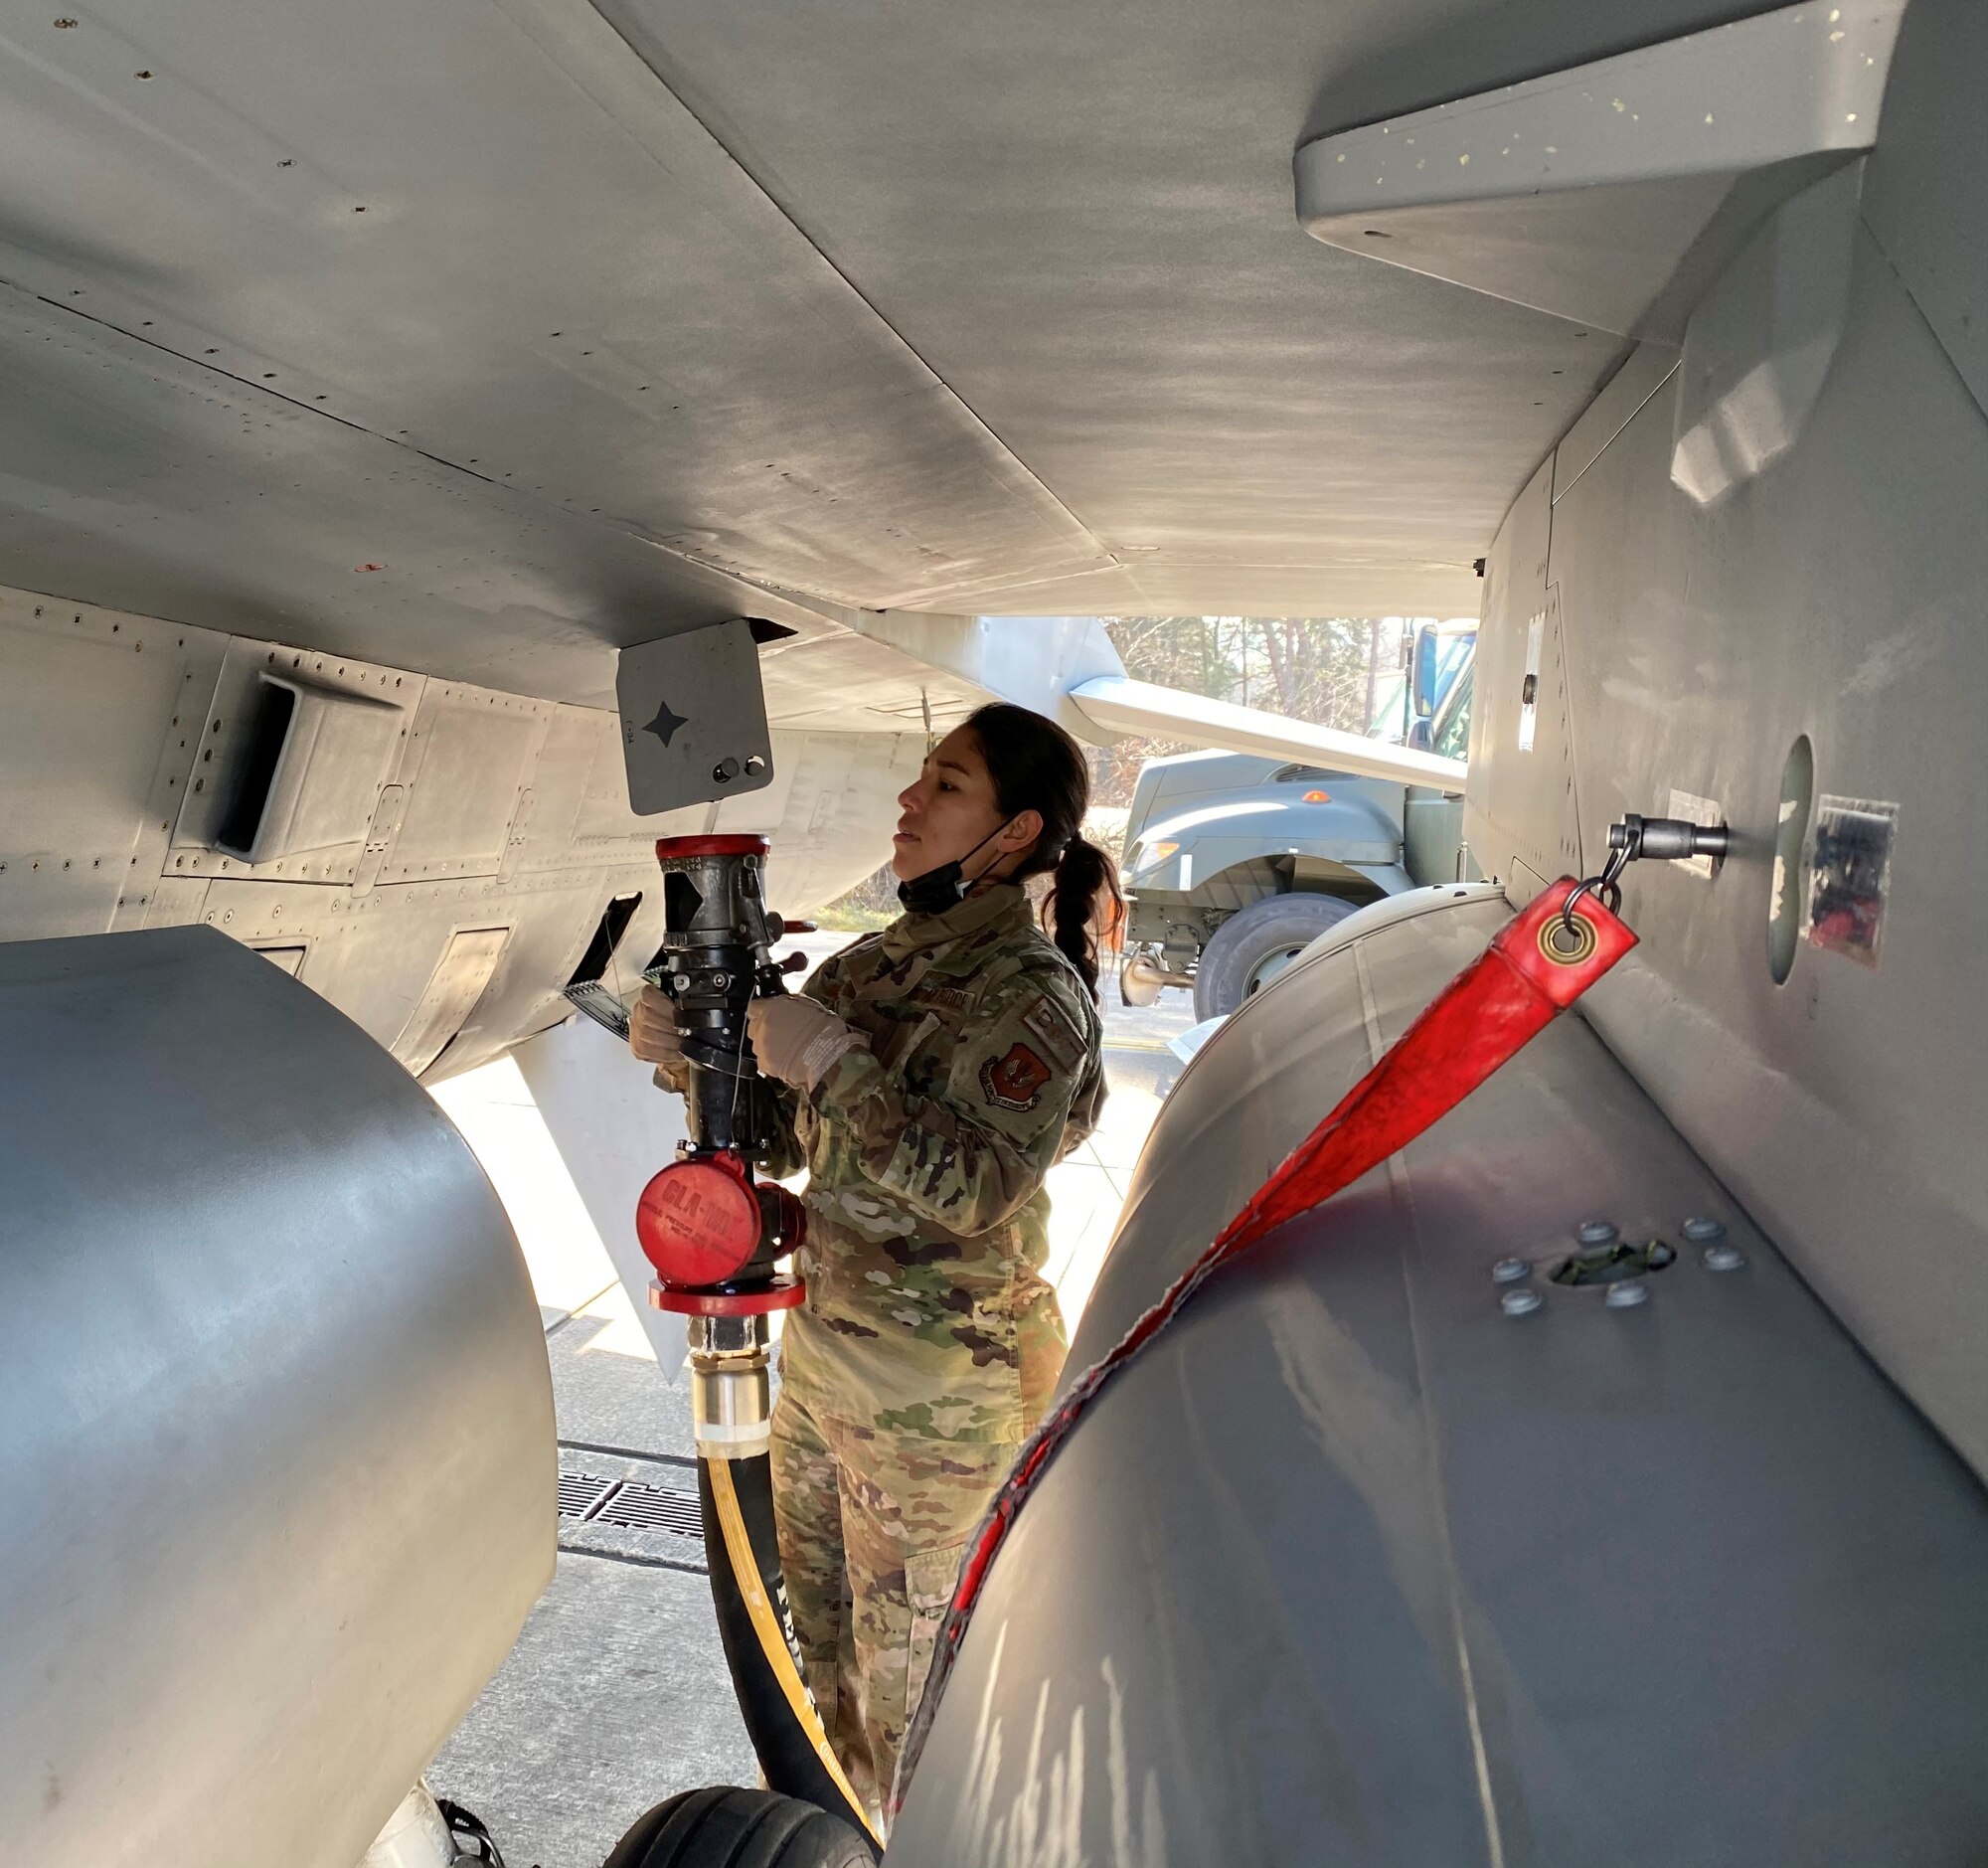 U.S. Air Force Tech Sgt. Rossmery Aragon-Leonard, 480th Fighter Squadron independent duty medical technician, refuels an U.S Air Force F-16 Fighting Falcon, during an Agile Combat Employment exercise at Ramstein Air Base, March 24, 2021.  Agile Combat Employment is an operational concept that allows forces to generate sorties from various locations with the support of multi-capable Airmen. (U.S. Air Force photo by Tech Sgt. Warren Spearman Jr.)